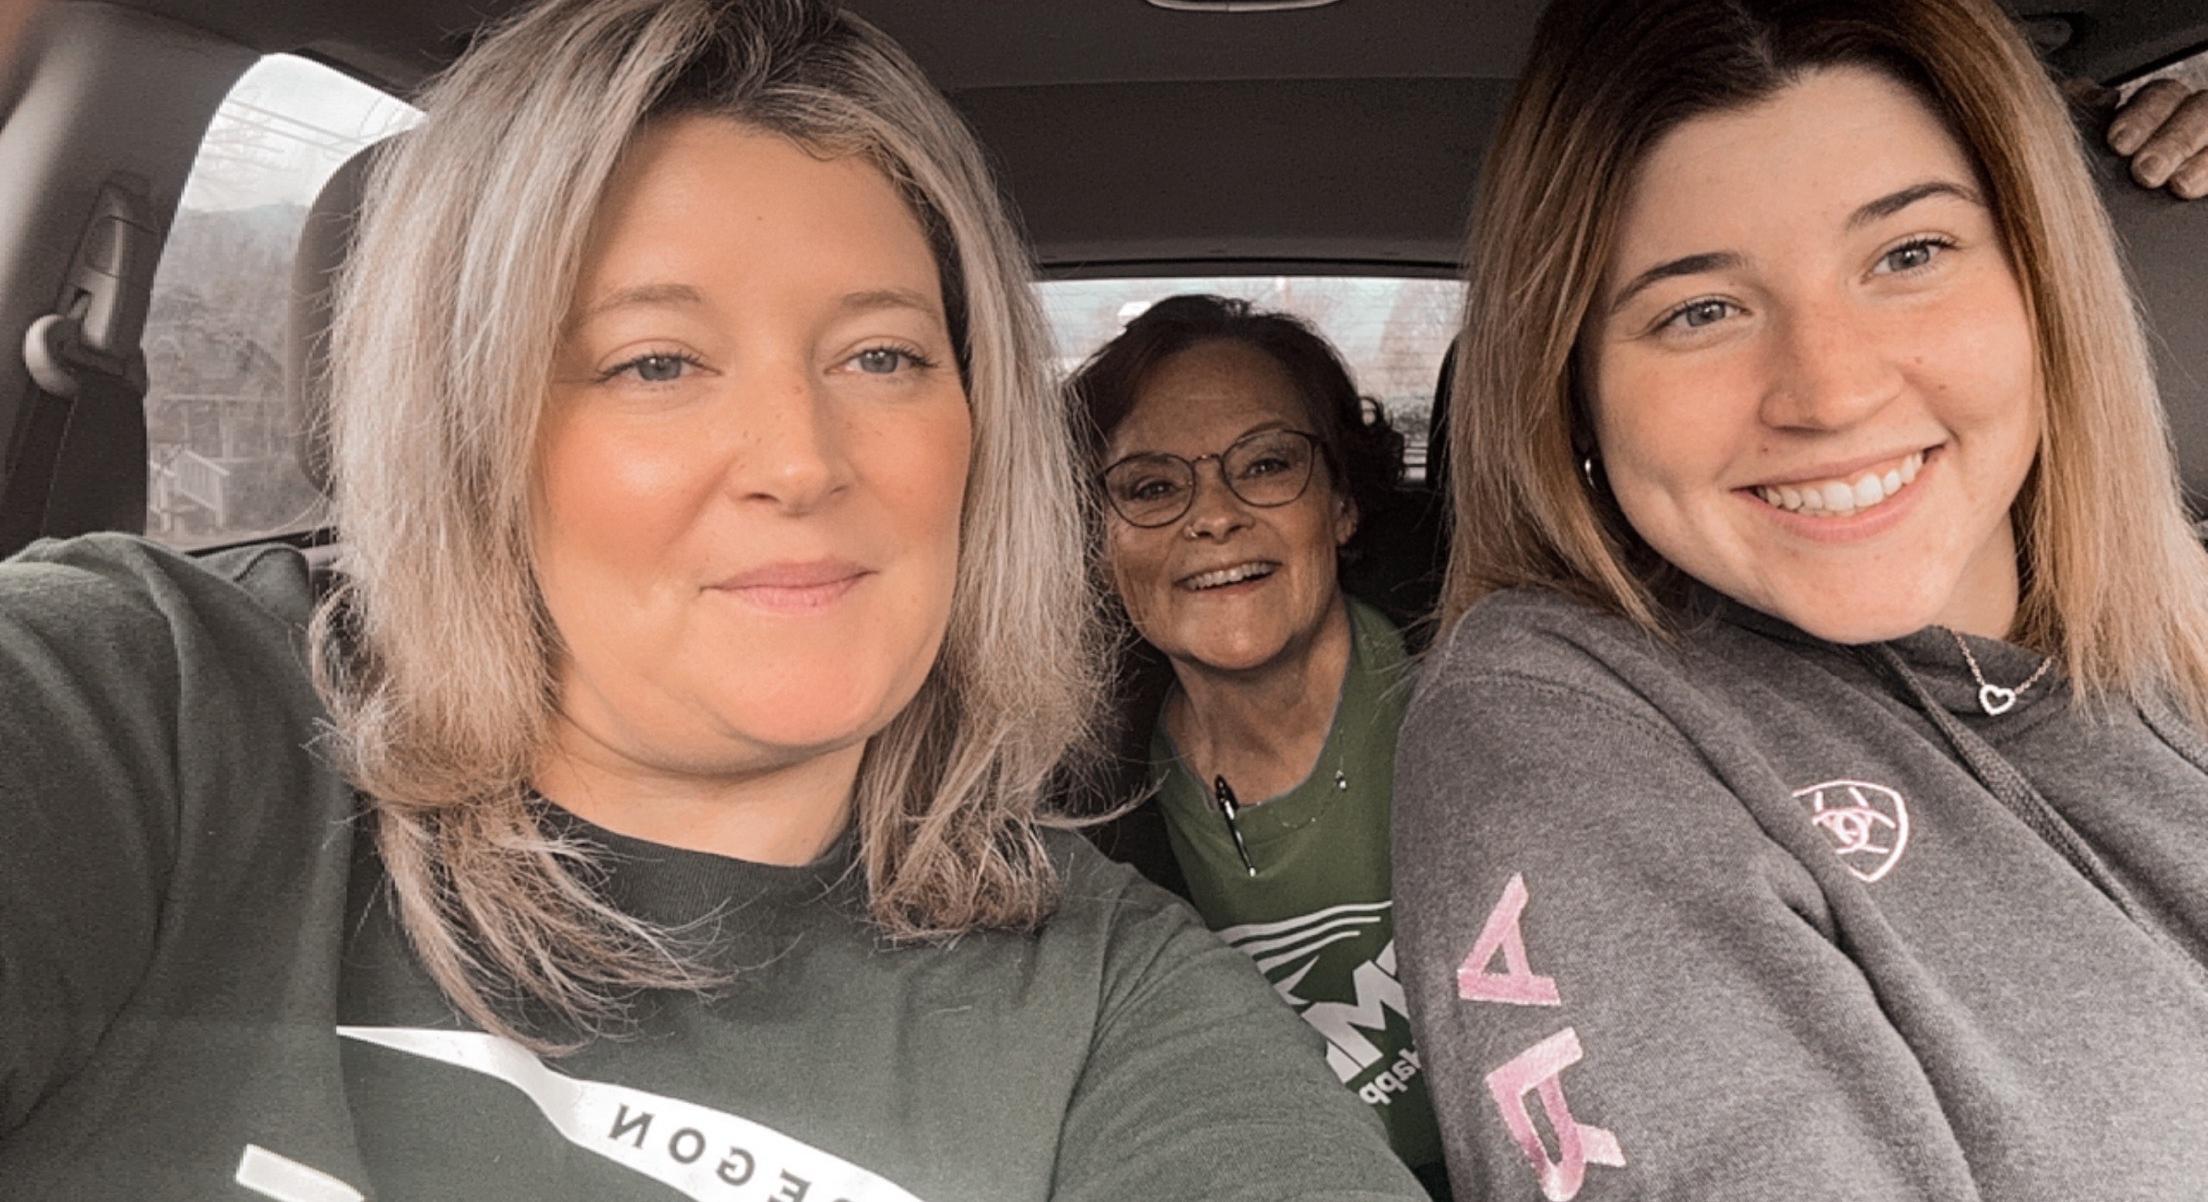 Three Grants Pass members taking a car selfie on their way to go door knocking